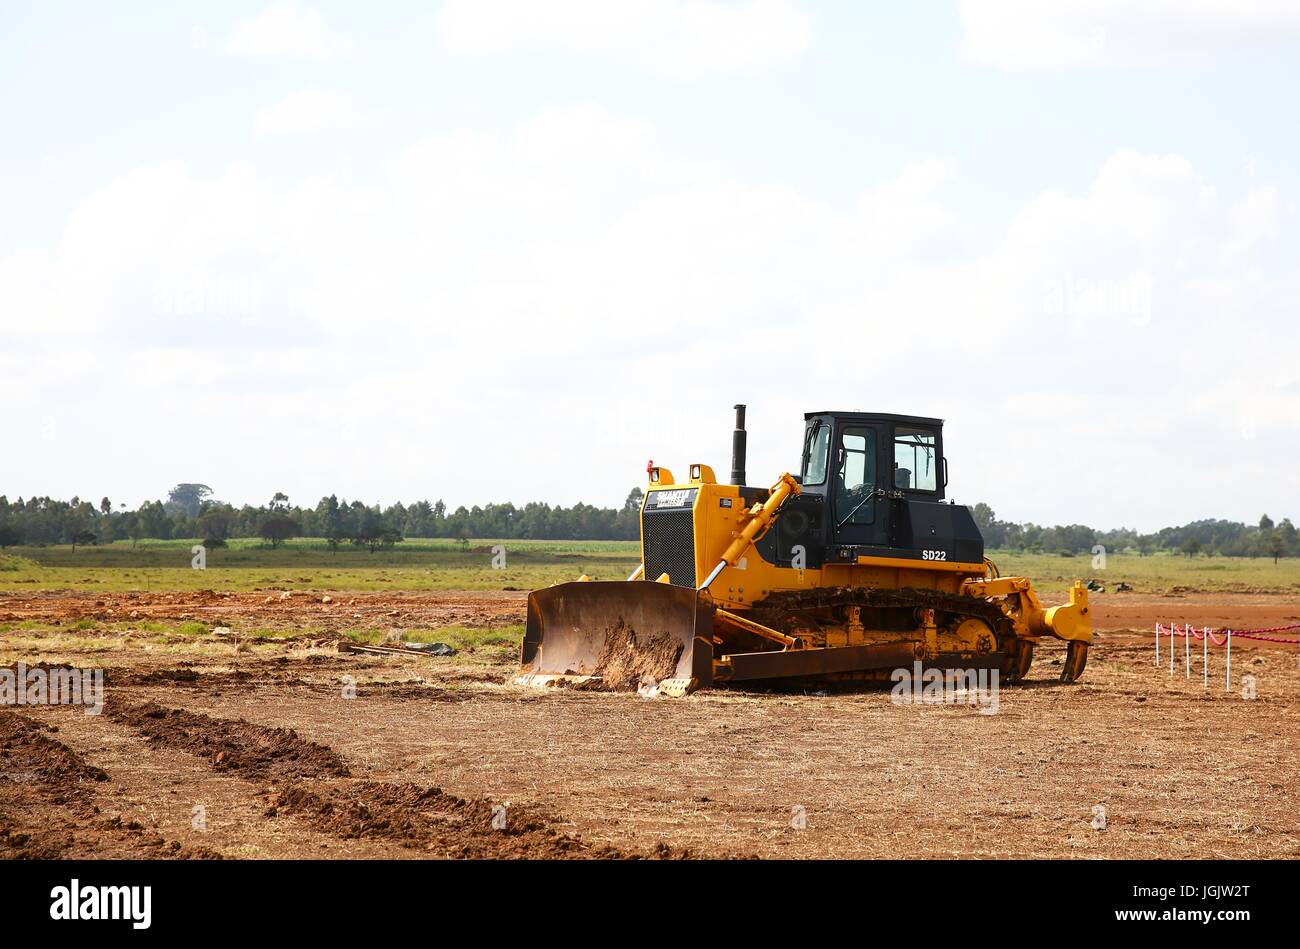 (170707) -- ELDORET(KENYA), July 7, 2017 (Xinhua) -- A bulldozer is seen at the launching ceremony of the Special Economic Zone project in Eldoret, Kenya, on July 7, 2017. Kenya on Friday launched a Special Economic Zone (SEZ) project that is expected to attract about 2 billion U.S. dollars of foreign investments. The project is a joint venture between Kenyan-based company Africa Economic Zone and China's Guangdong New South Group. (Xinhua/Pan Siwei) Stock Photo